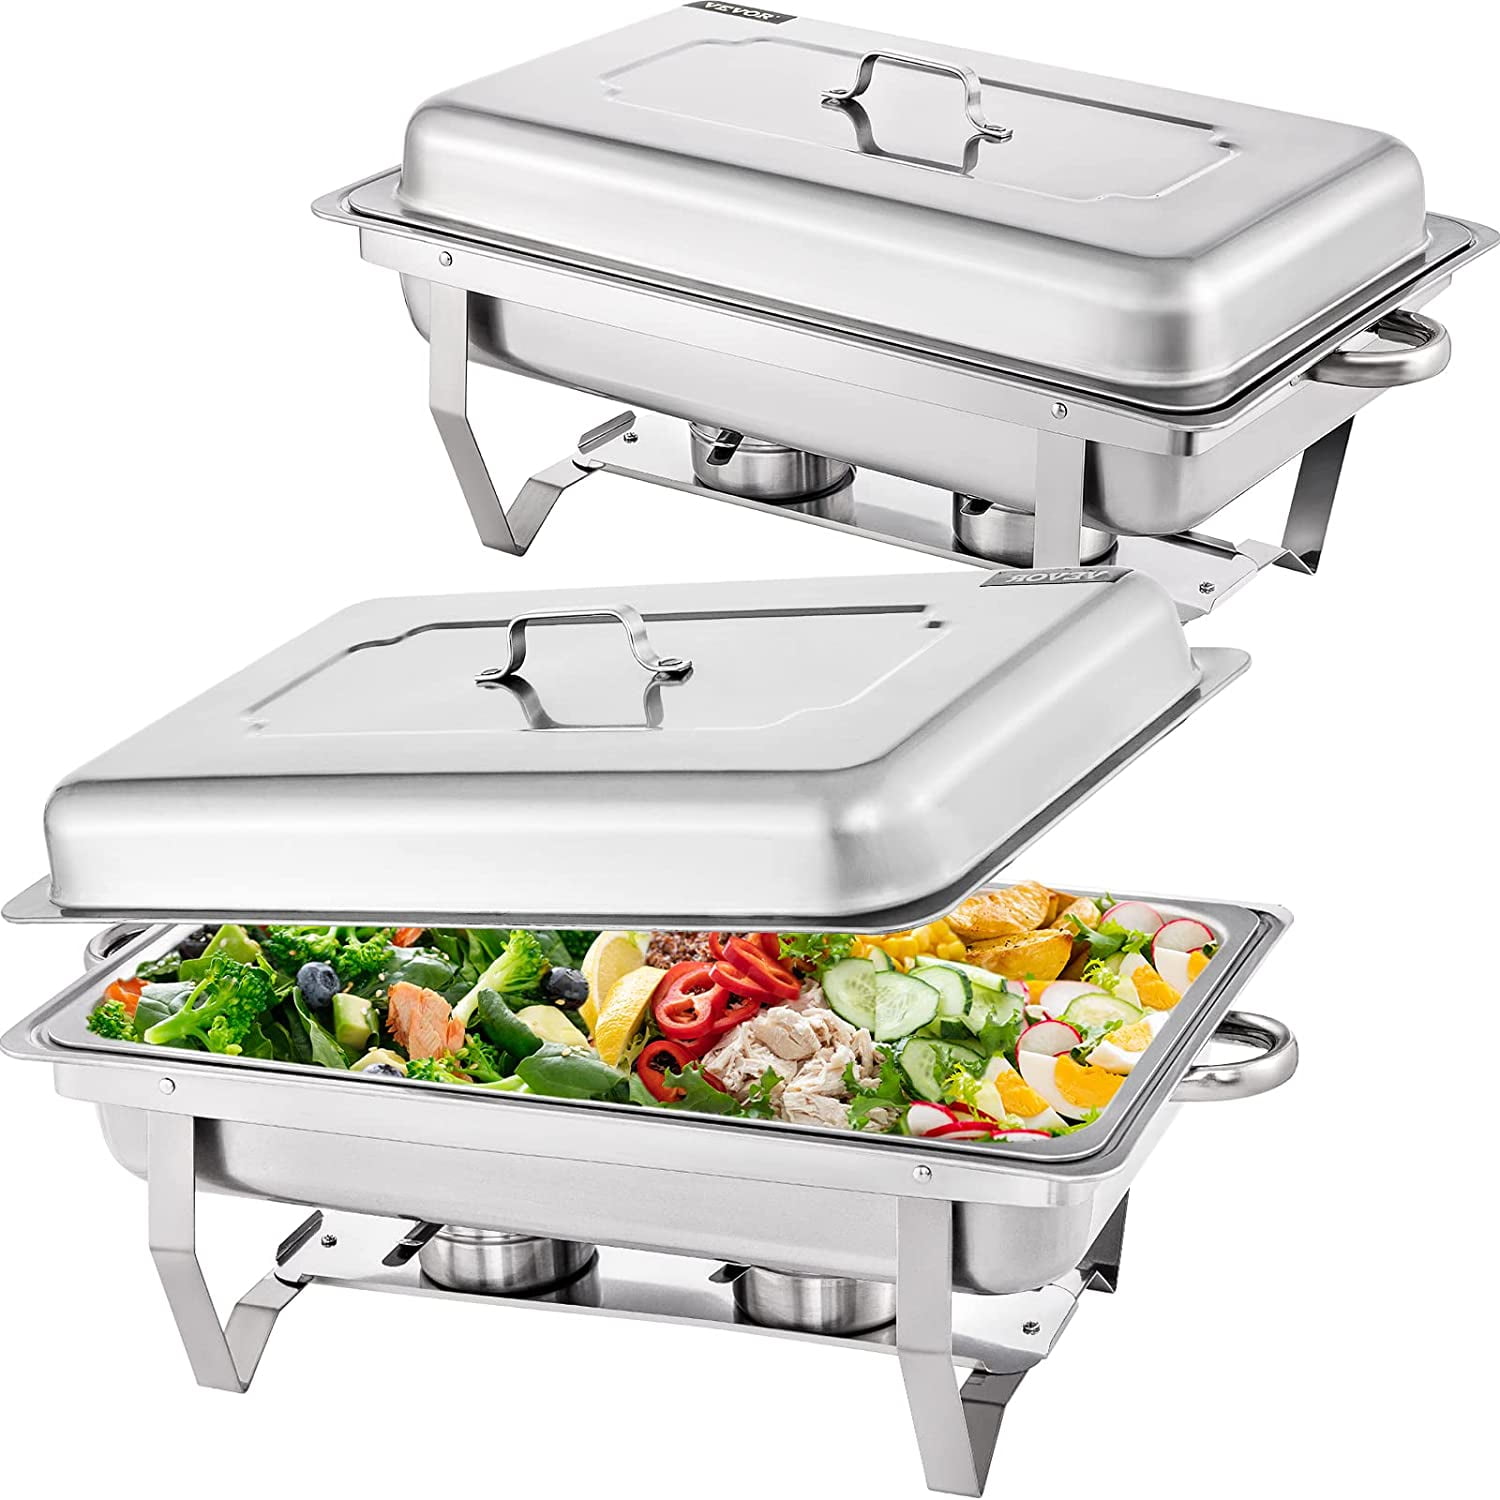 Large Chafing Dish 9-Liter 9.5 Quart Stainless Steel Buffet Catering Restaurant 